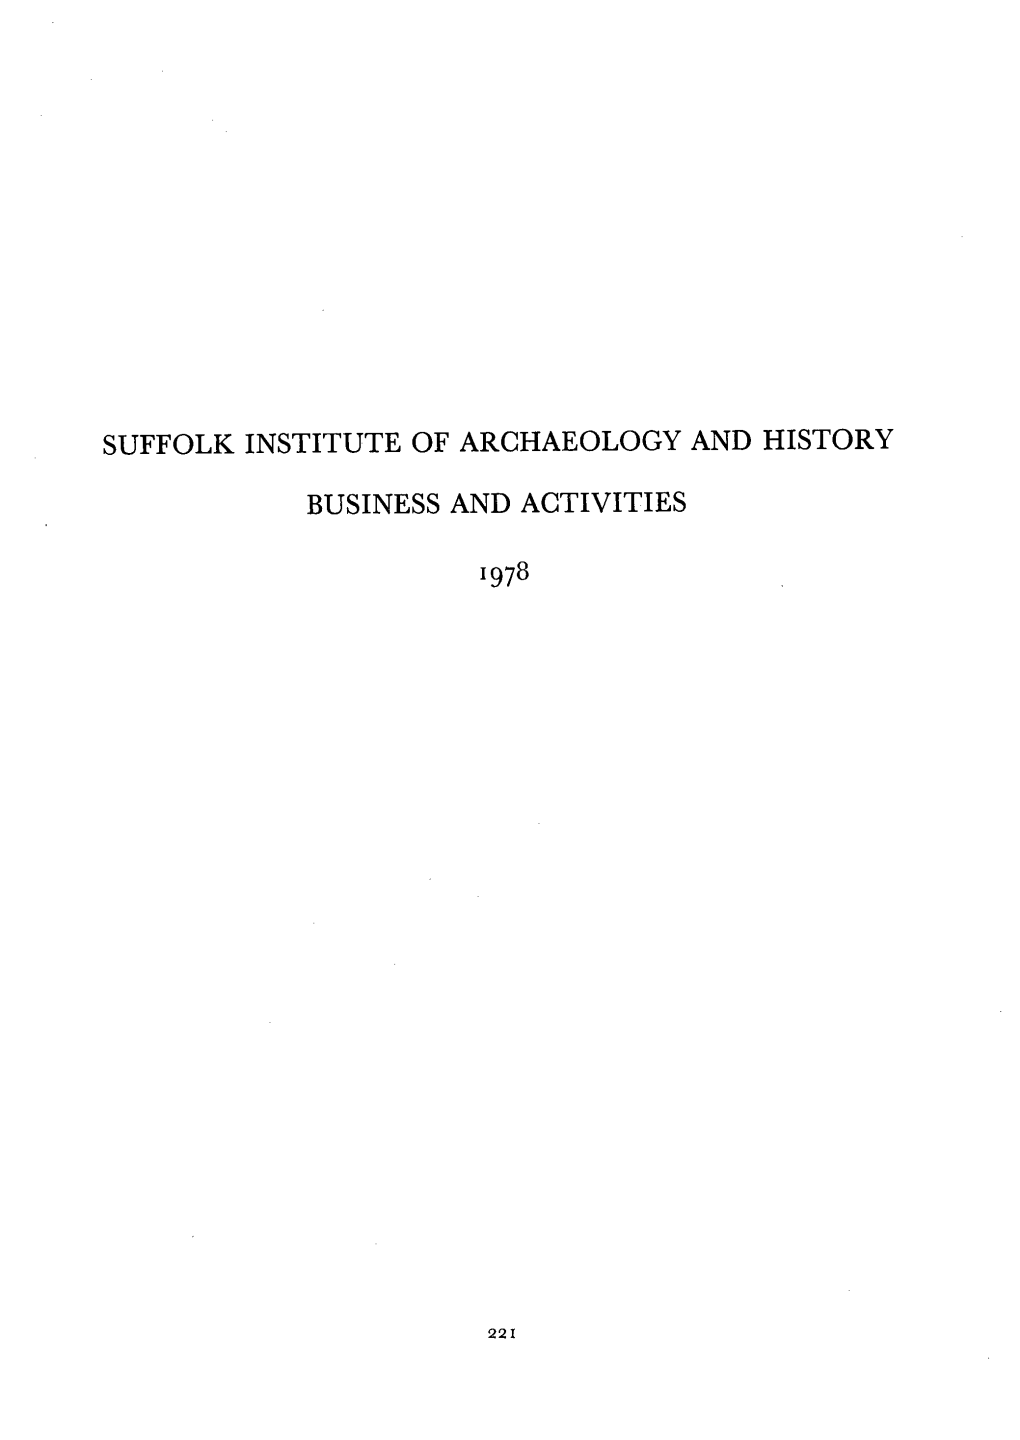 Suffolk Institute of Archaeology and History